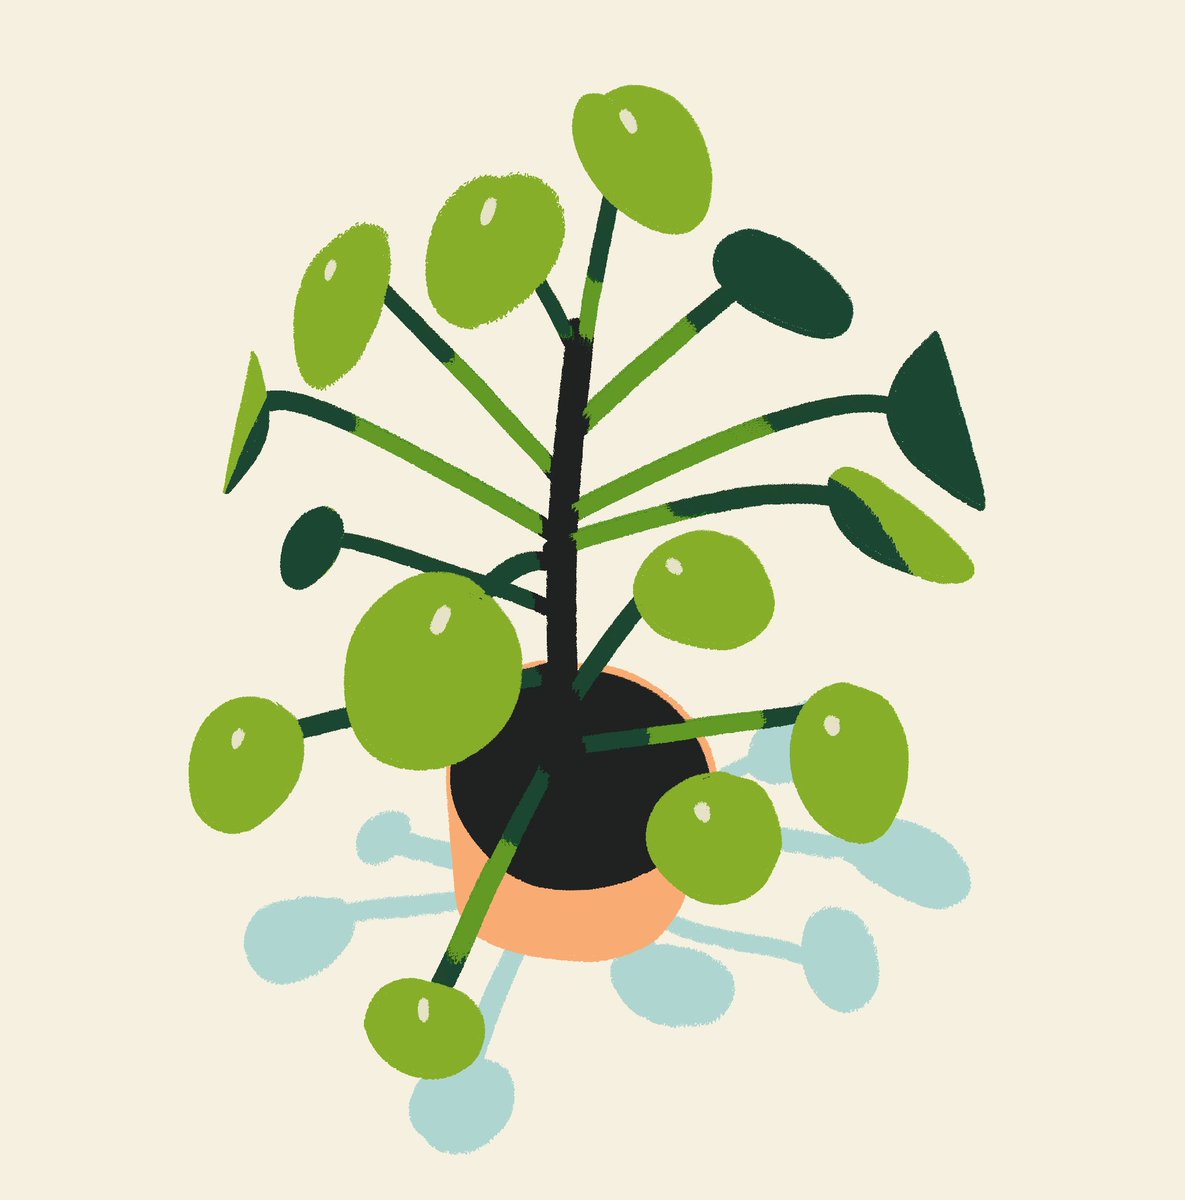 「Drew this very leggy office plant in abo」|Lydia Hill🍃のイラスト